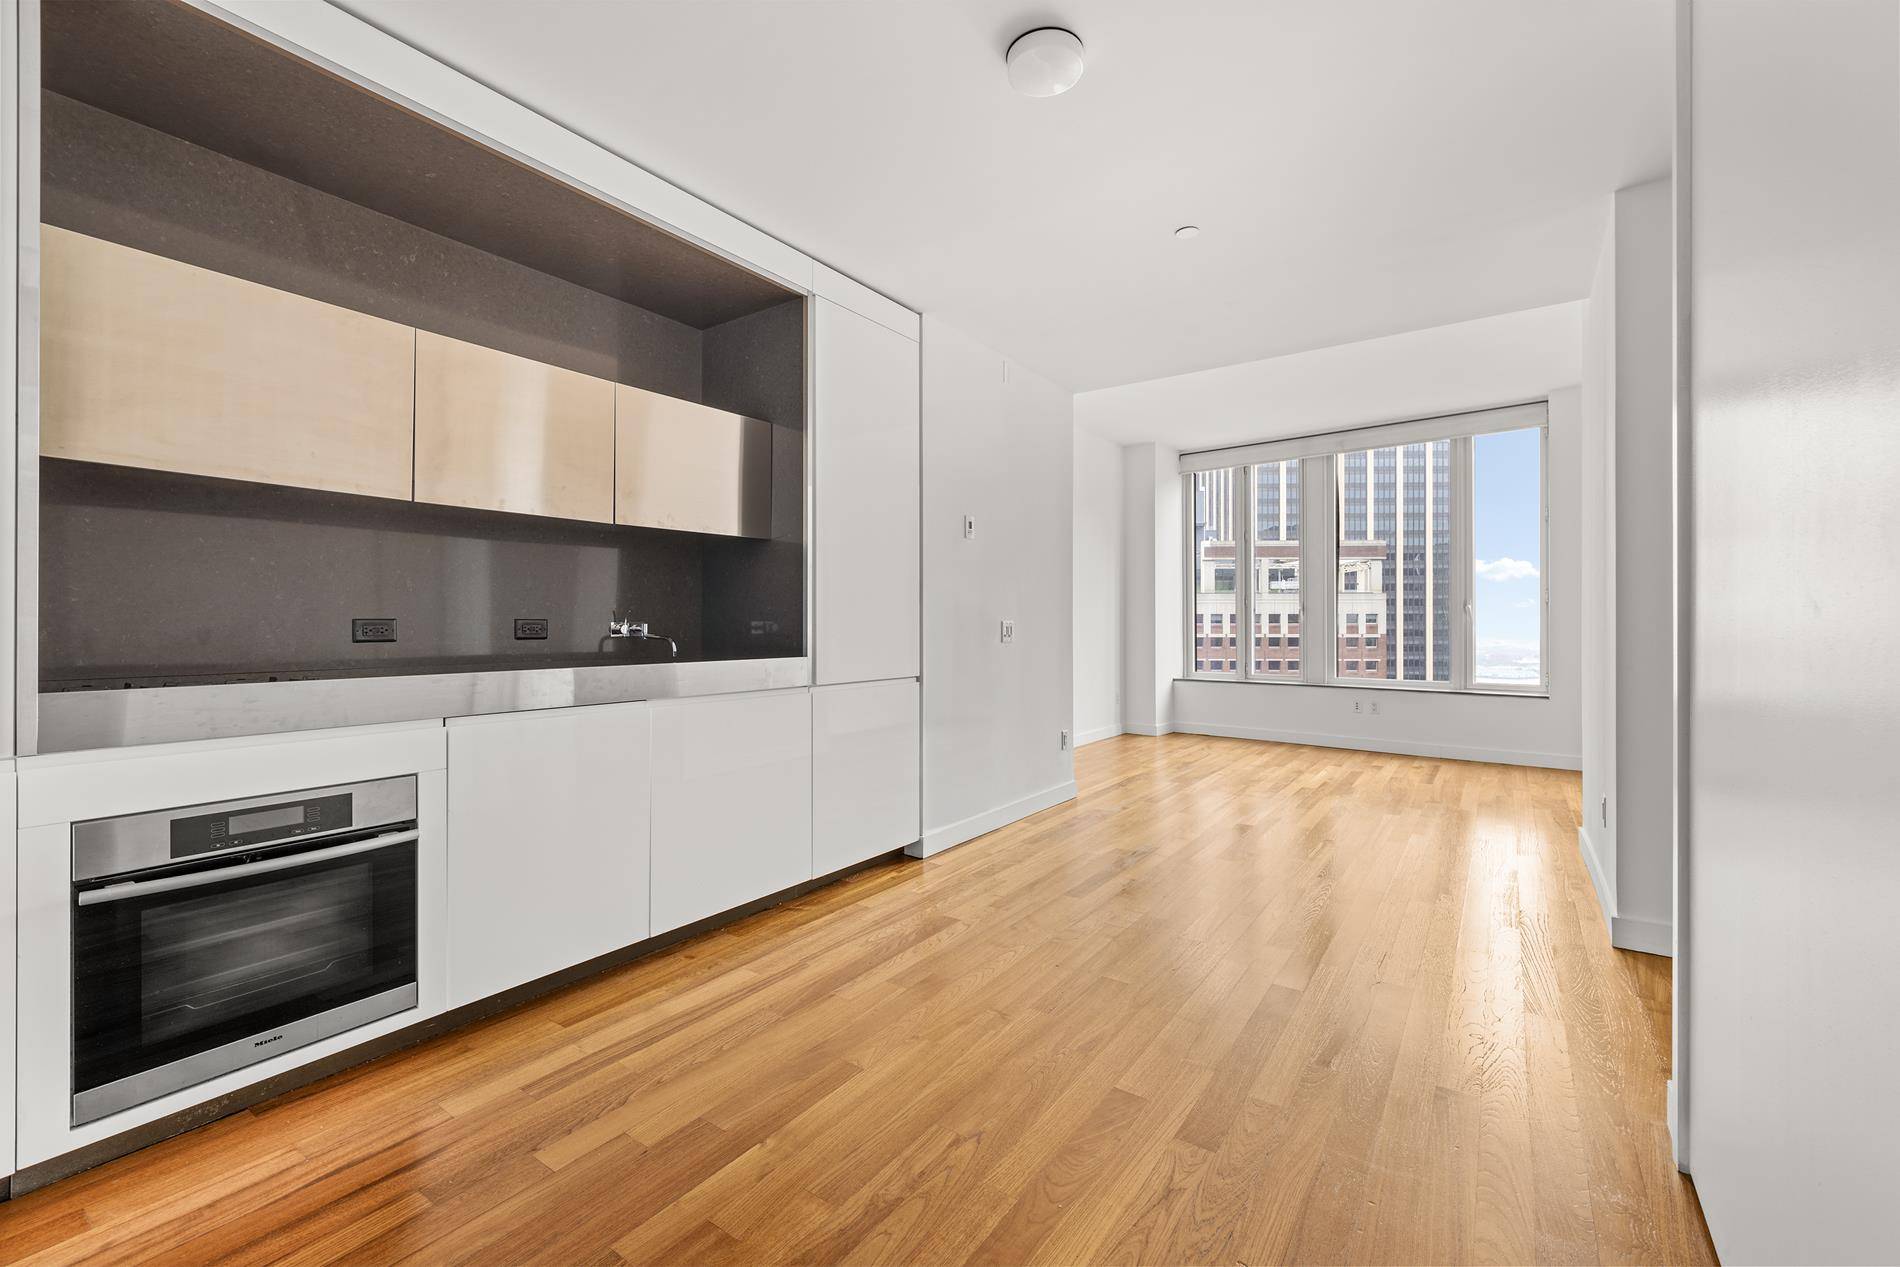 CUSTOM MADE WALKIN CLOSETSTORAGE UNIT INCLUDED IN SALE PRICEDiscover the epitome of urban living in this oversized one bedroom, perfectly situated on the 21st floor of the iconic 15 William ...